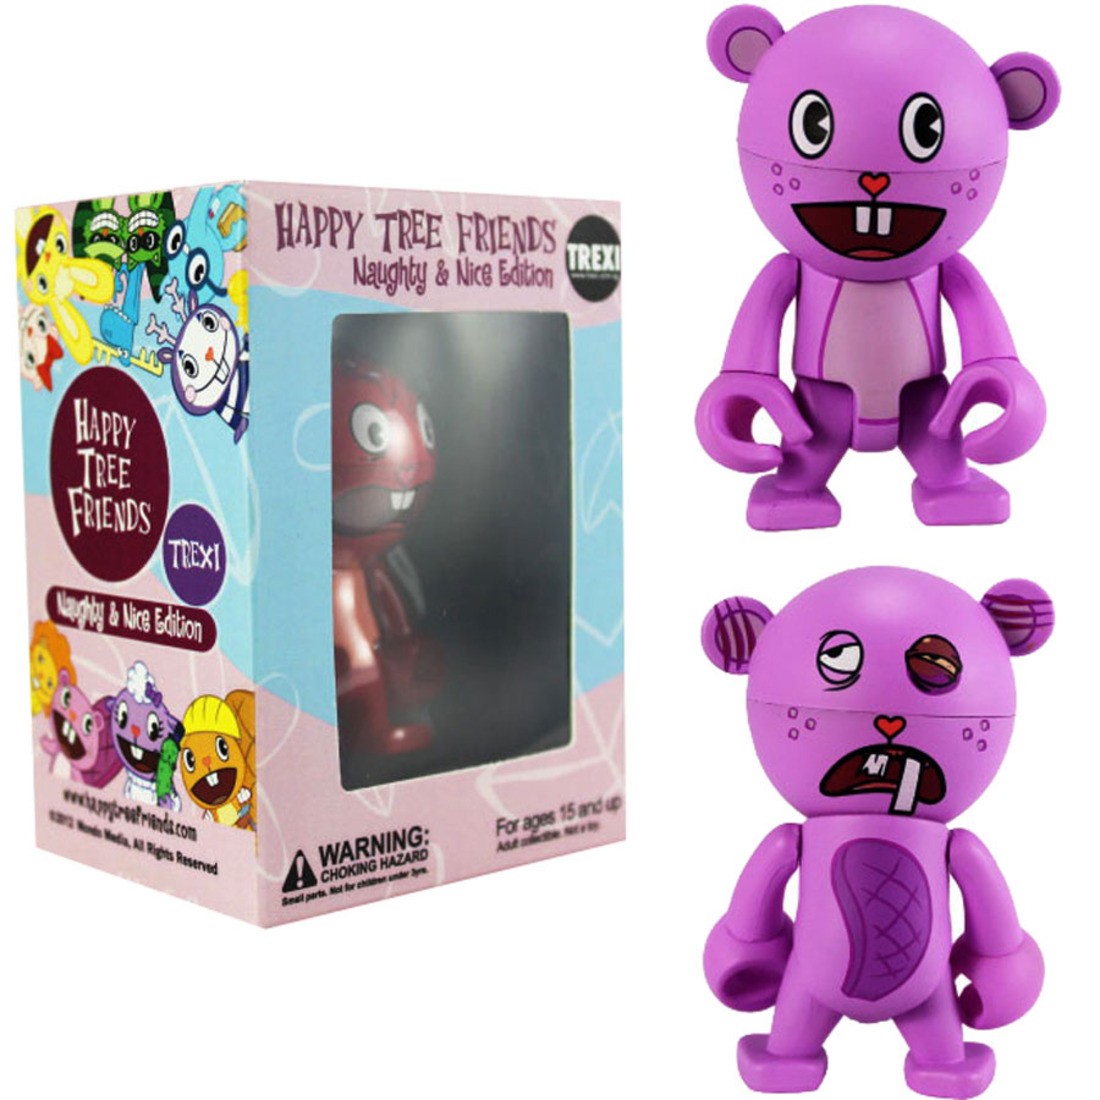 Happy Tree Friends Toothy 2.5 Inch Trexi Figure - Naughty And Nice (purple)